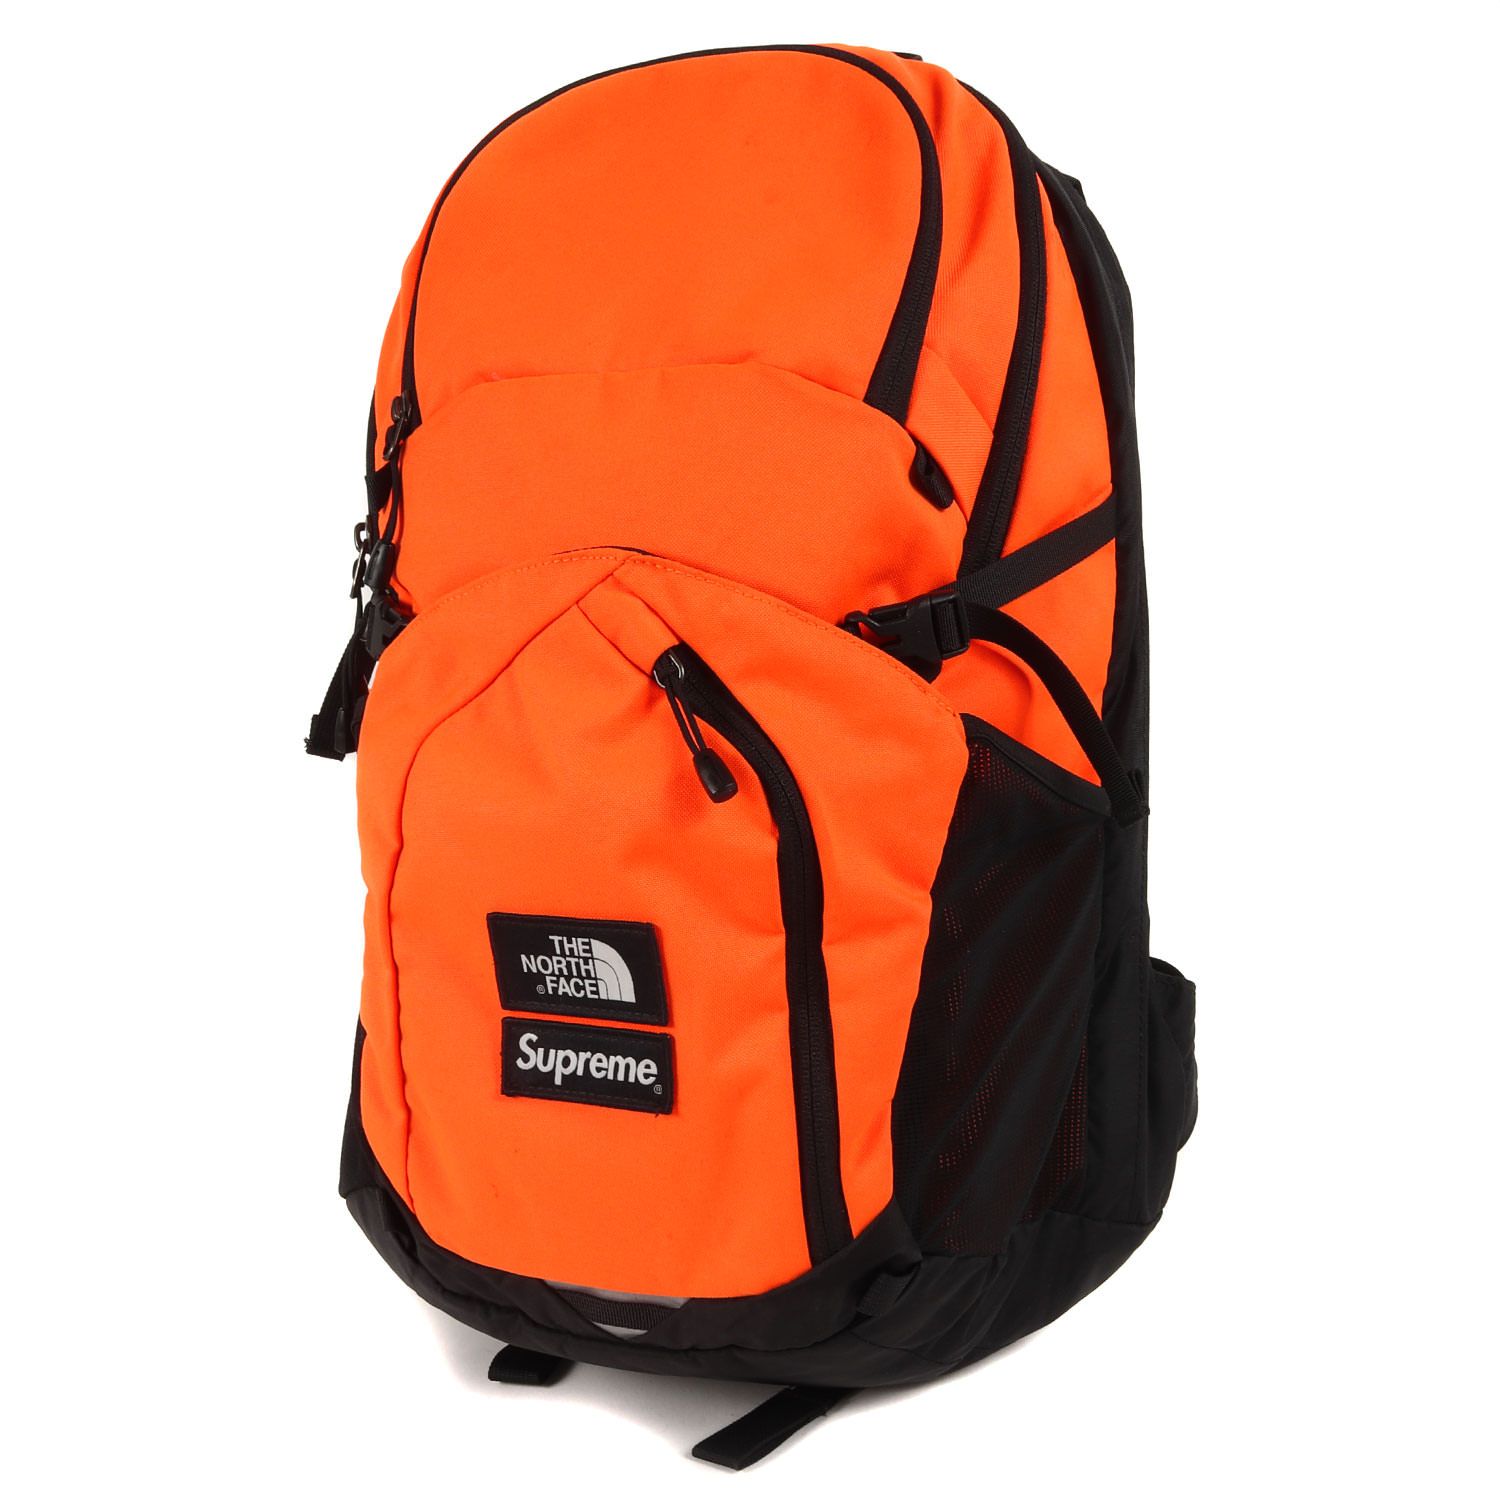 supreme x THE NORTH FACE backpack 16aw www.krzysztofbialy.com